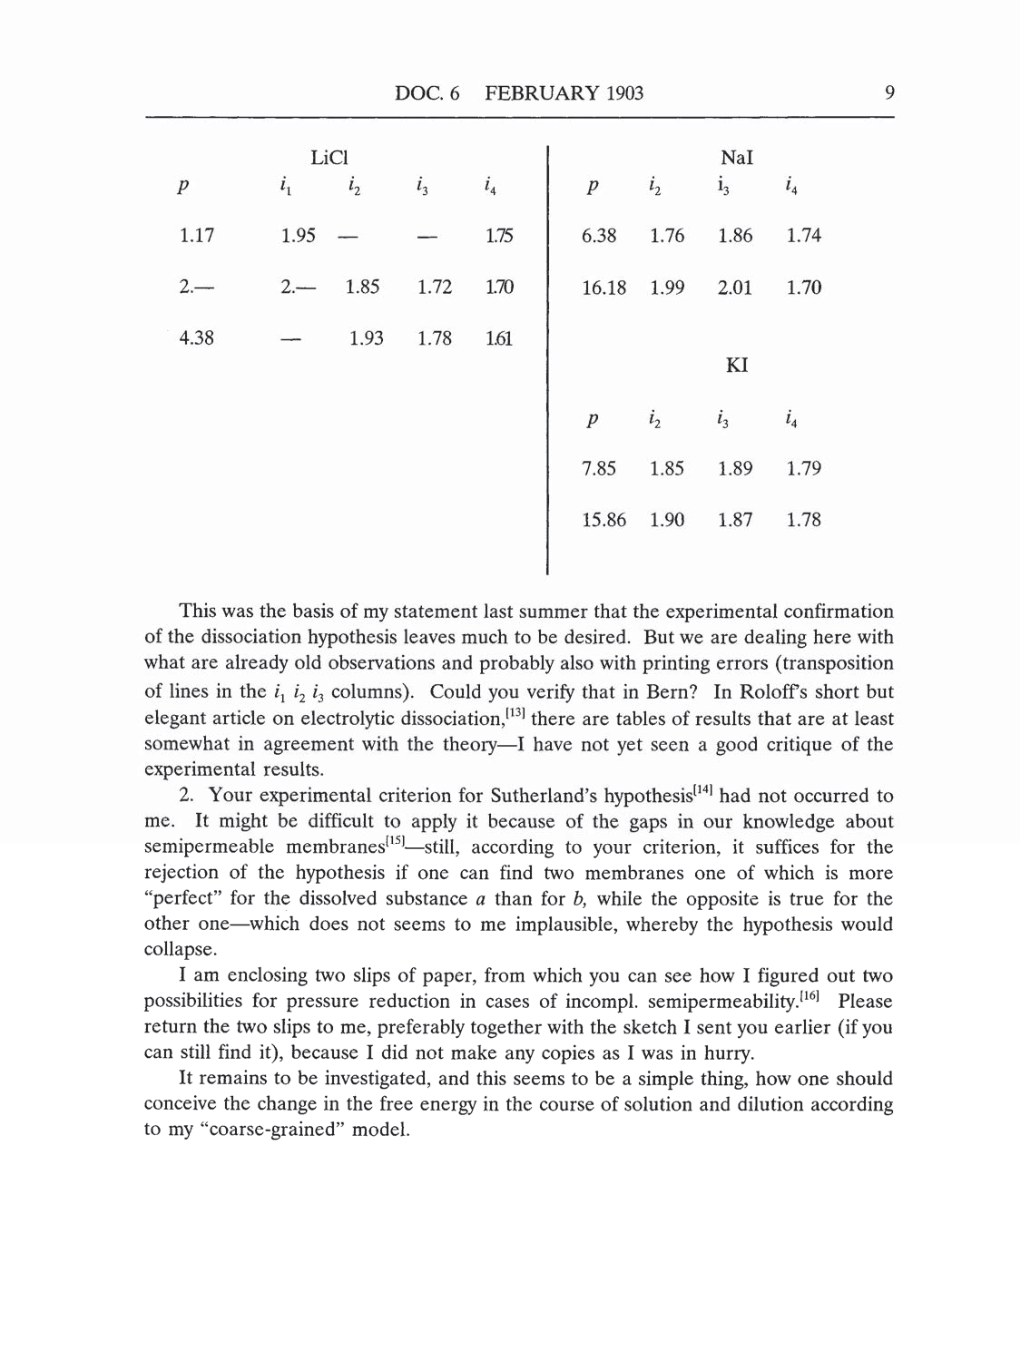 Volume 5: The Swiss Years: Correspondence, 1902-1914 (English translation supplement) page 9